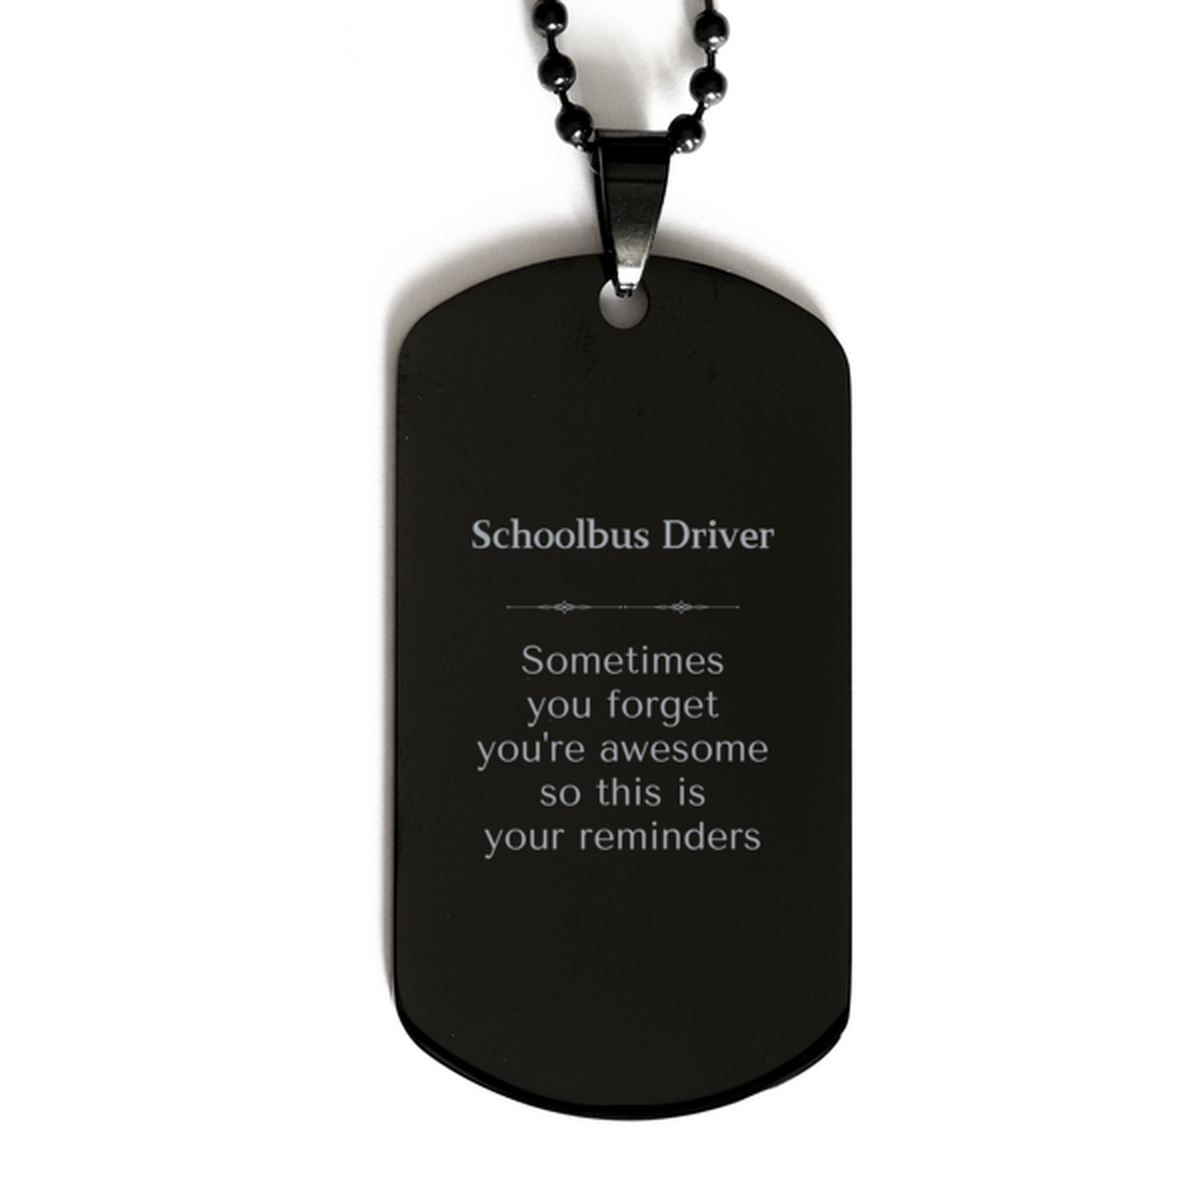 Sentimental Schoolbus Driver Black Dog Tag, Schoolbus Driver Sometimes you forget you're awesome so this is your reminders, Graduation Christmas Birthday Gifts for Schoolbus Driver, Men, Women, Coworkers